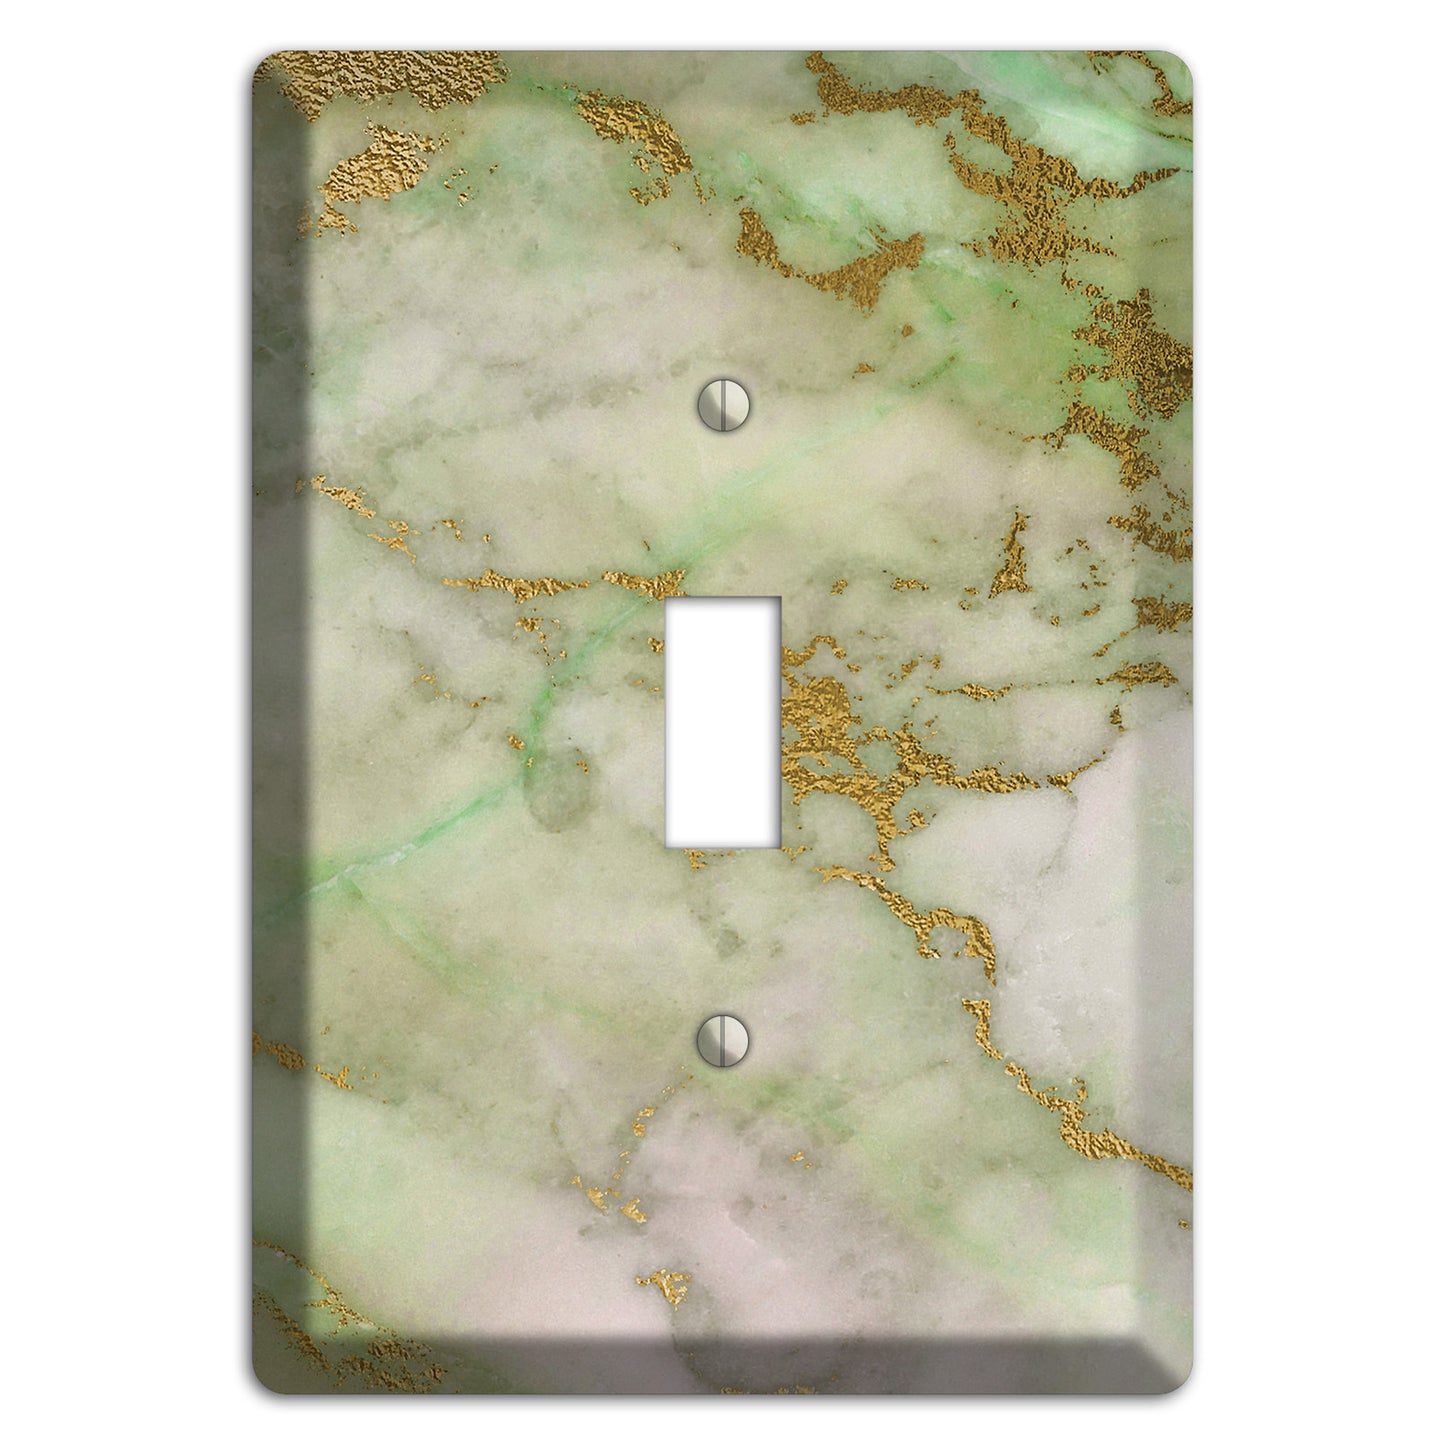 Swamp Green Marble Cover Plates